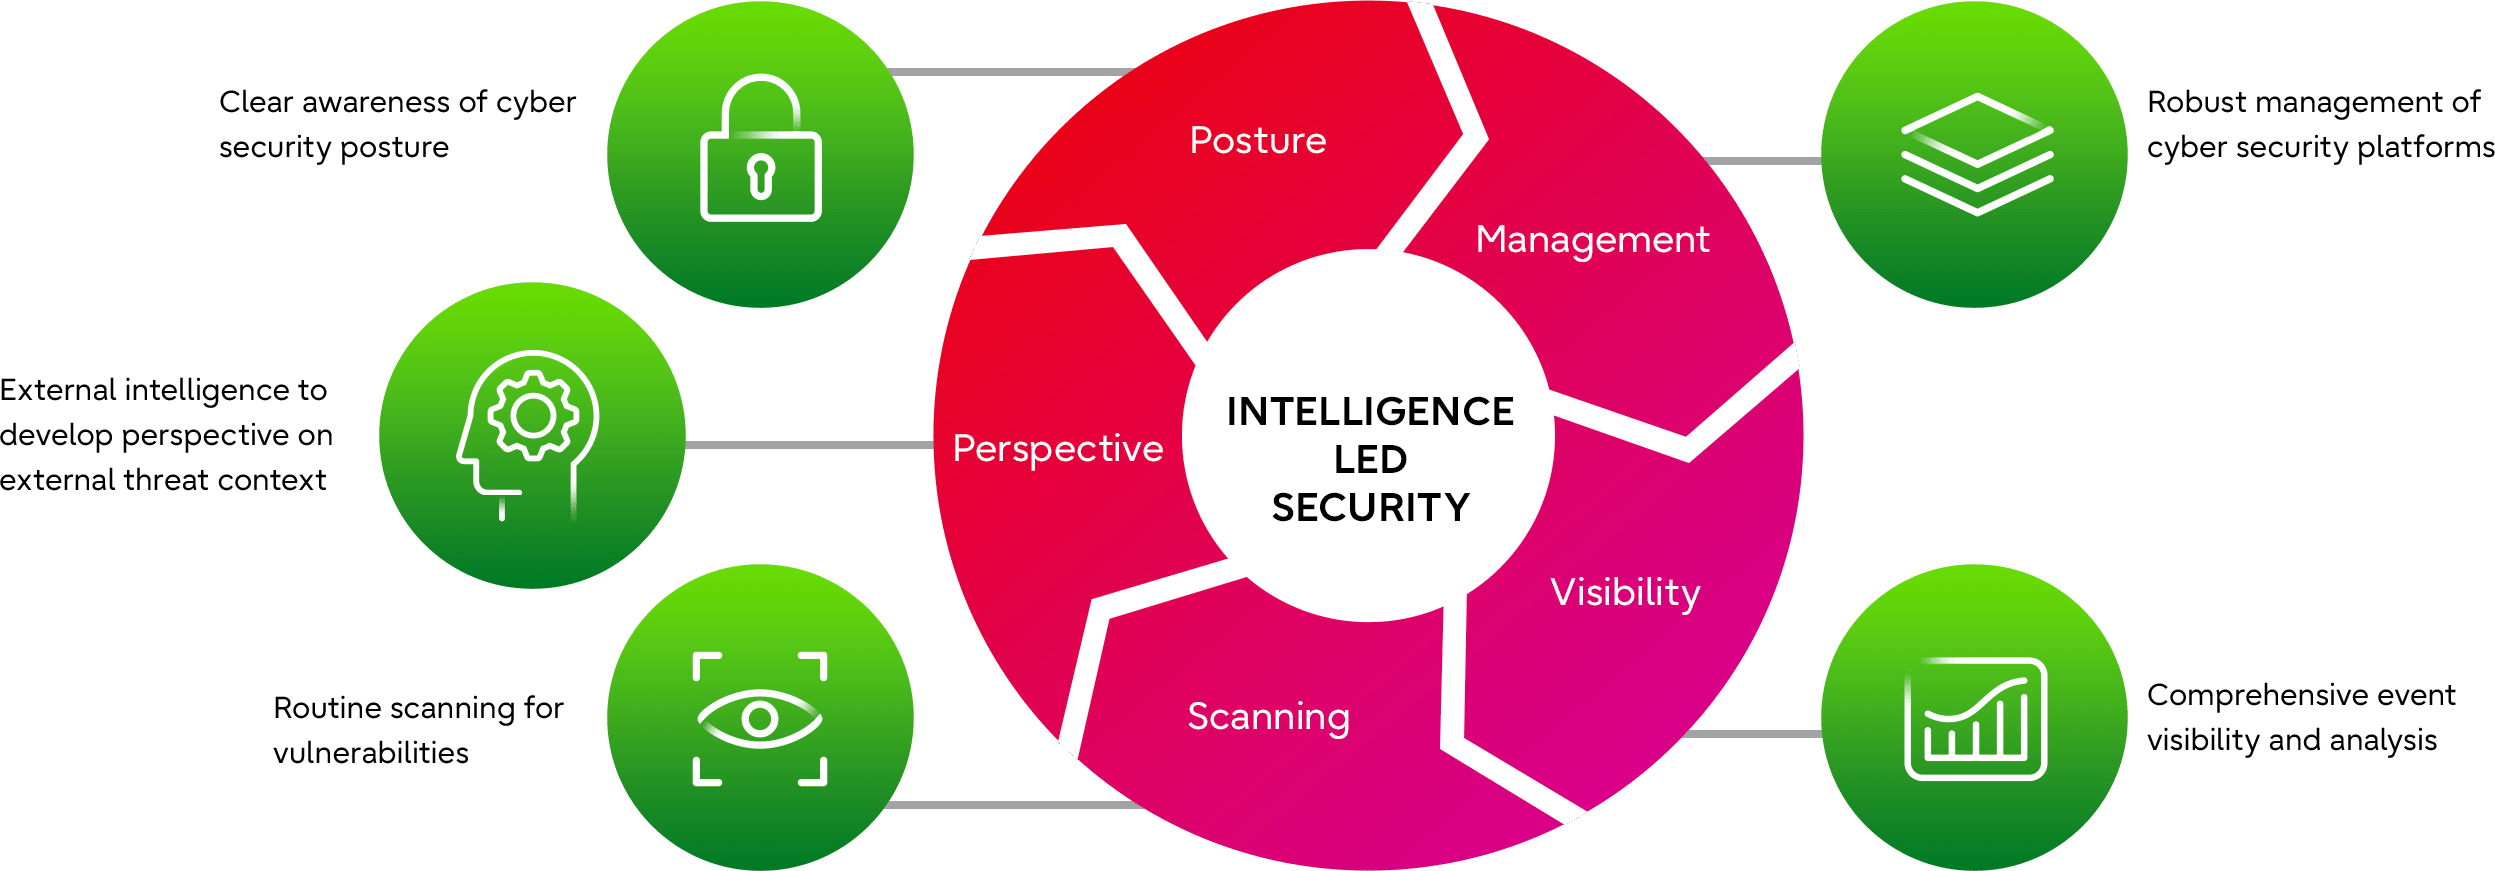 Why Take An Intelligence-led Security Approach?